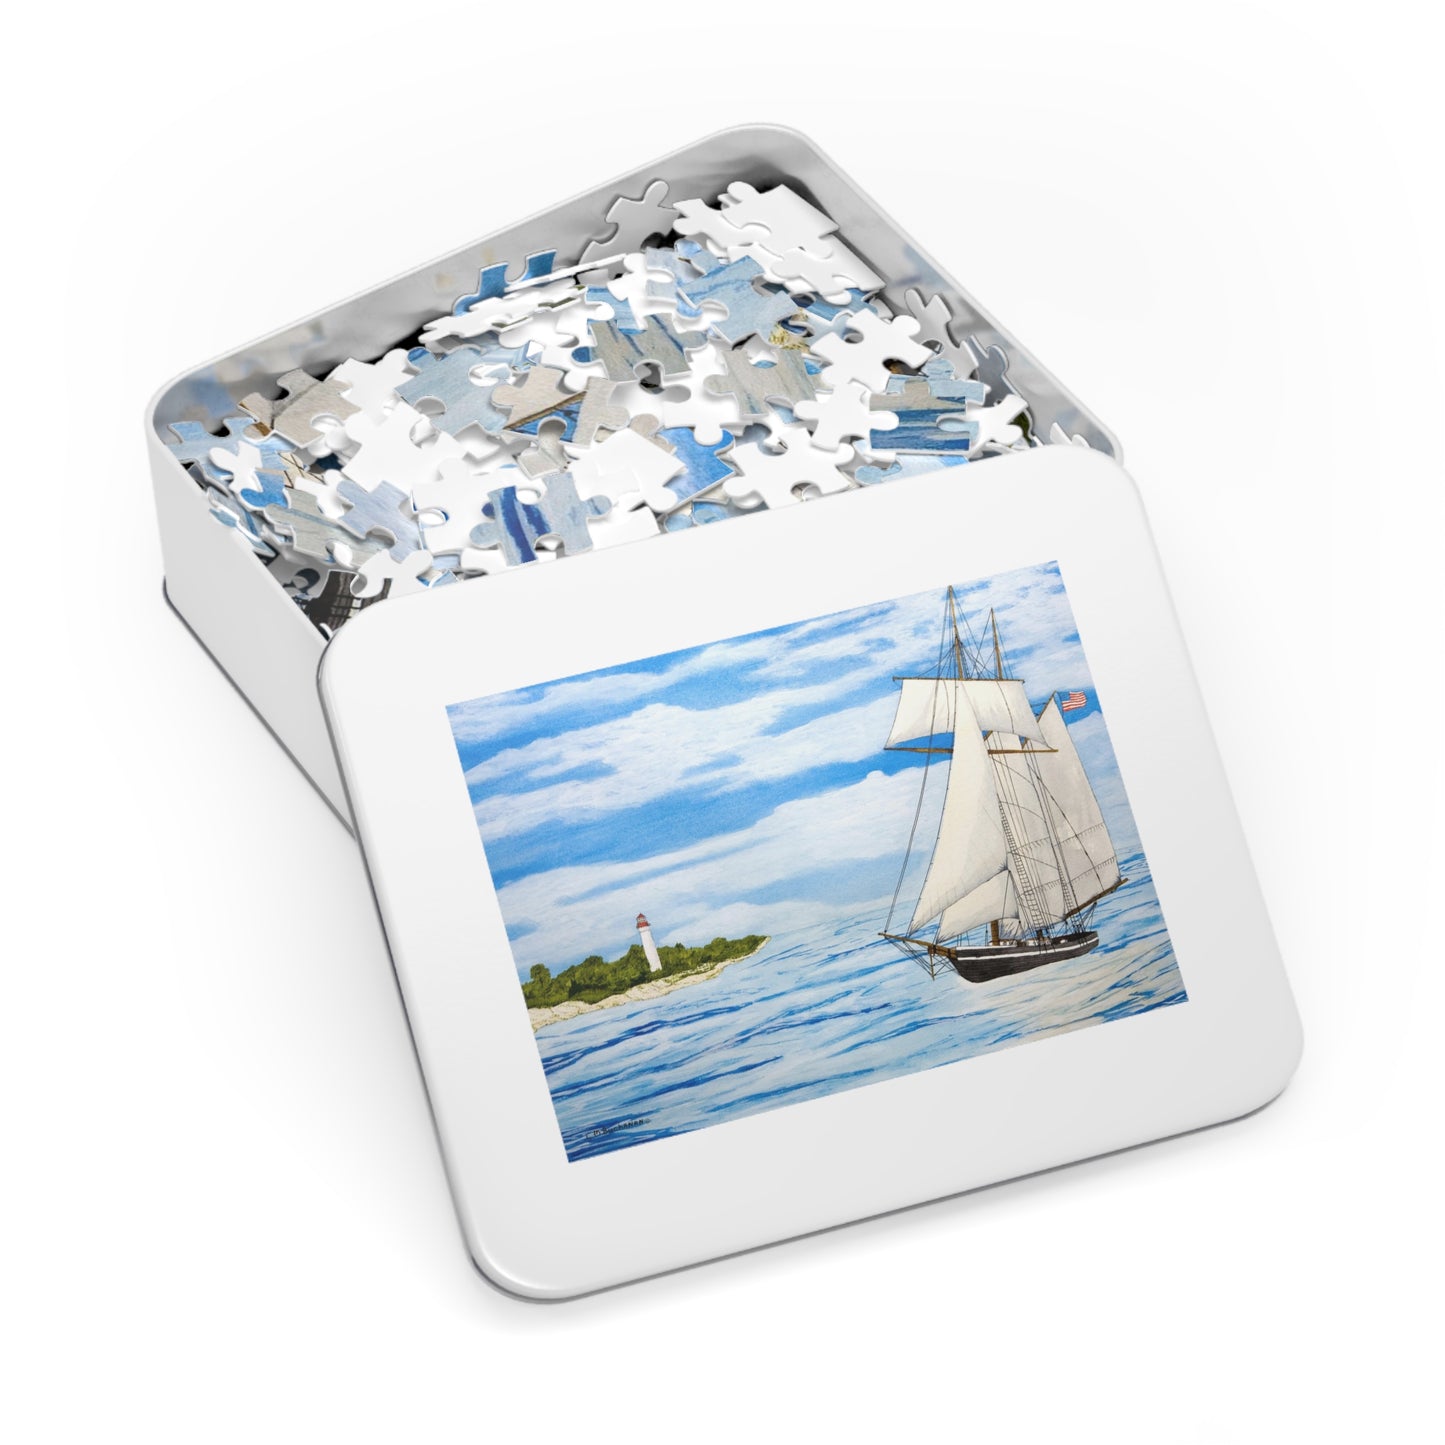 Pleasant Breeze Off Cape May Jigsaw Puzzle